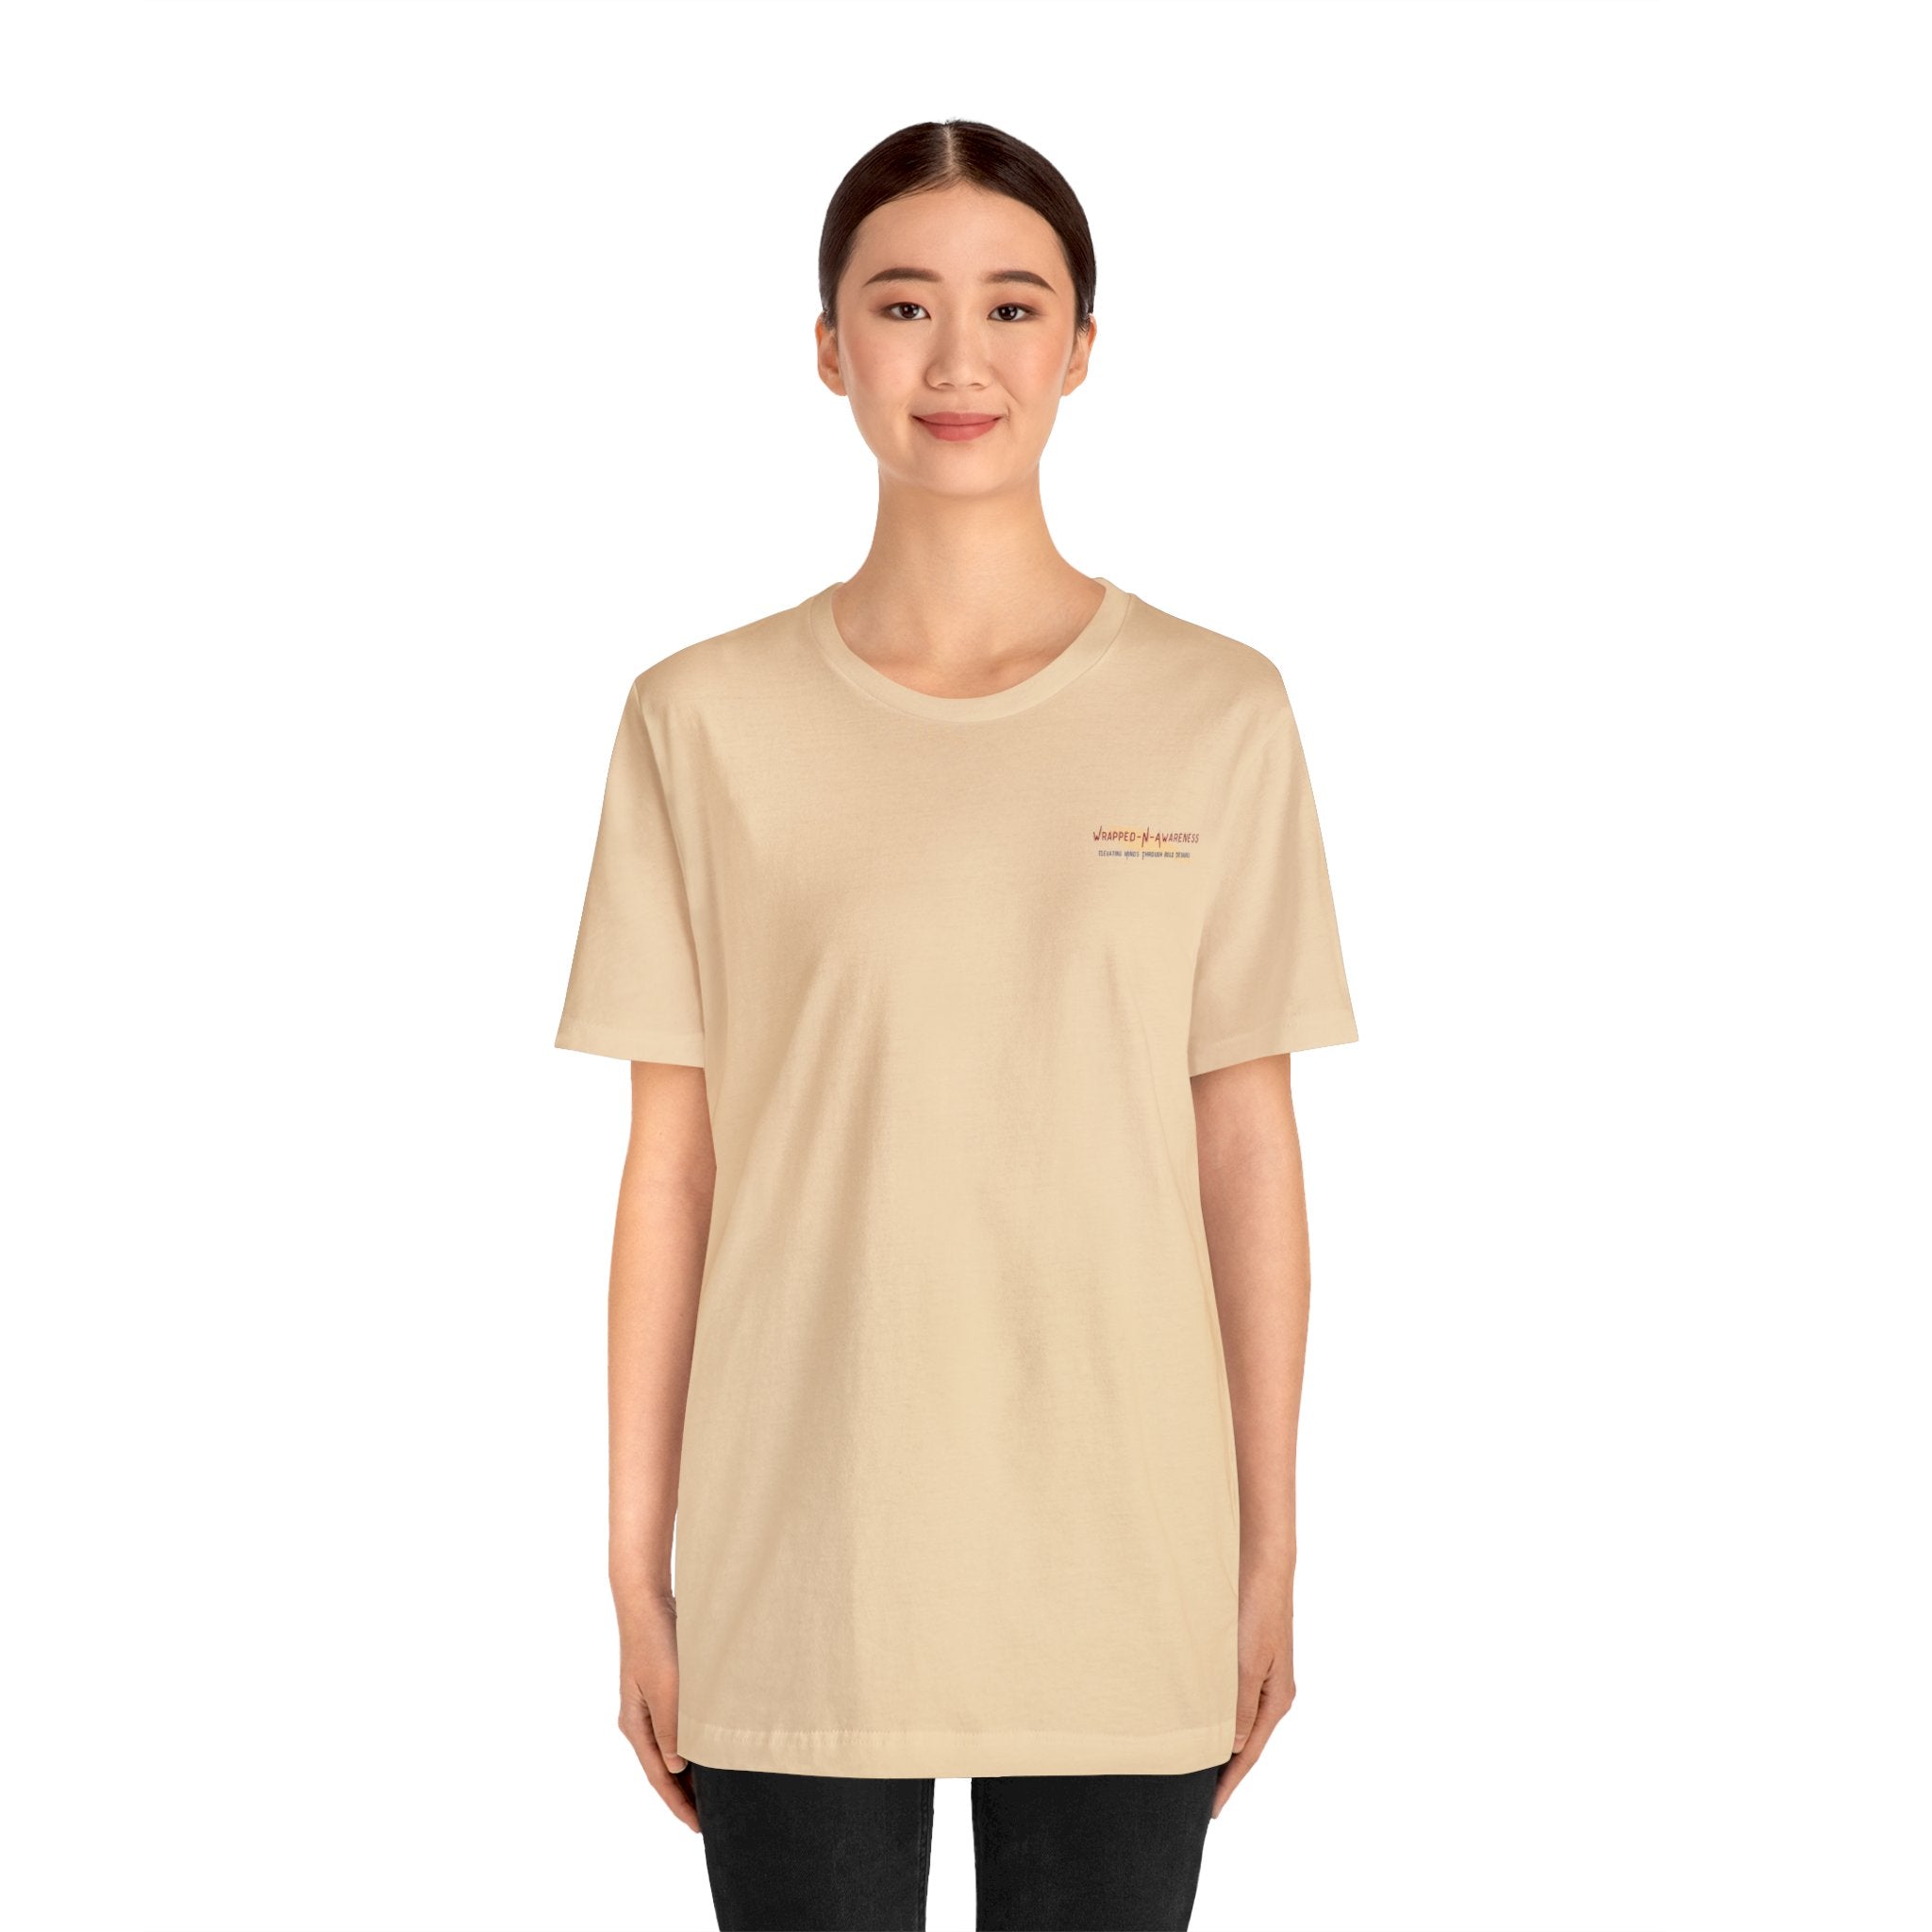 Inspire Growth Jersey Tee - Bella+Canvas 3001 Turquoise Airlume Cotton Bella+Canvas 3001 Crew Neckline Jersey Short Sleeve Lightweight Fabric Mental Health Support Retail Fit Tear-away Label Tee Unisex Tee T-Shirt 15961708761274633944_2048 Printify